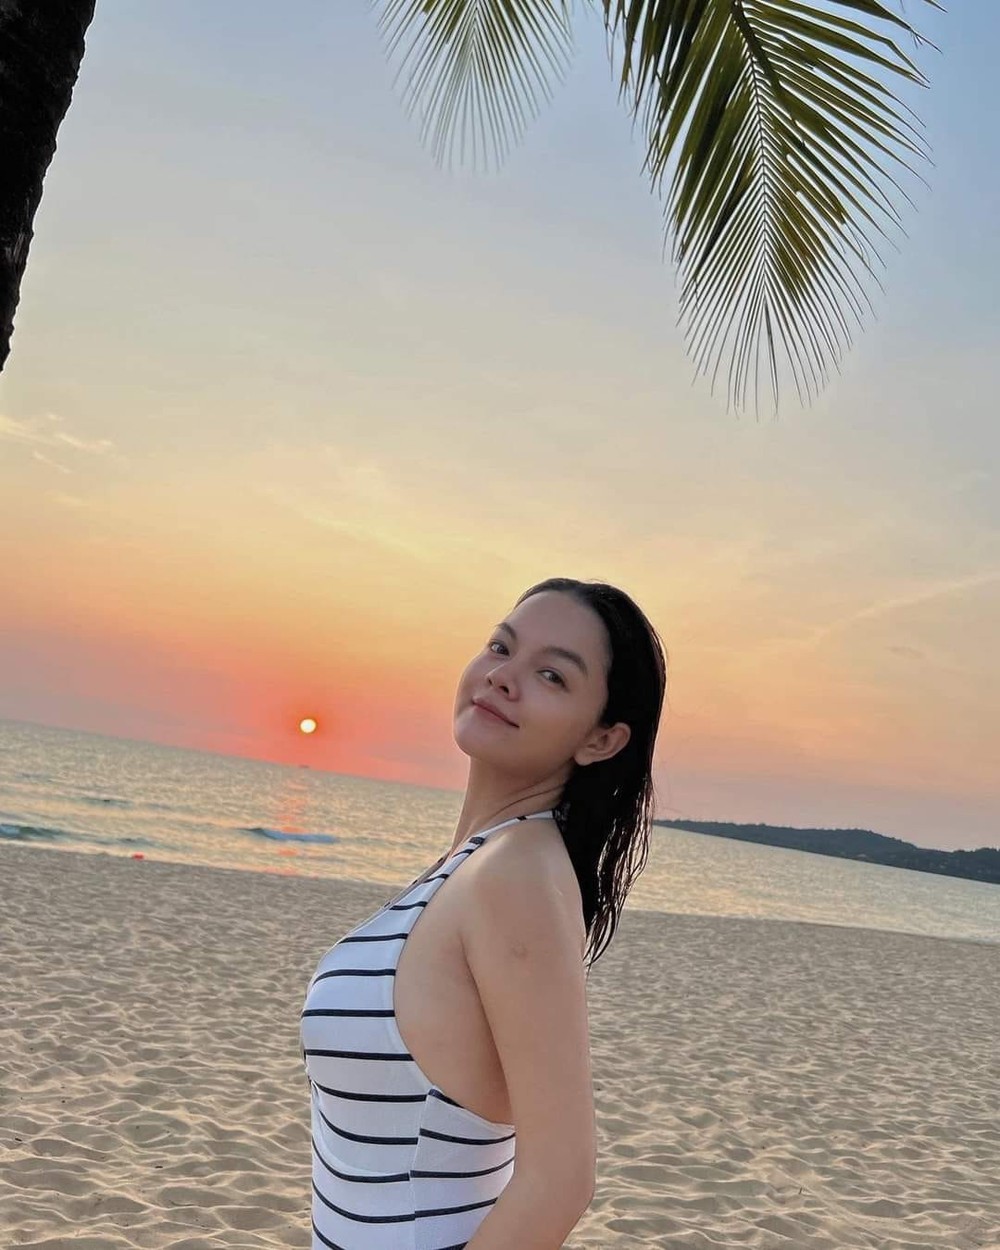 Pham Quynh Anh released bikini photos, showing off her body after pregnancy rumors - Photo 2.